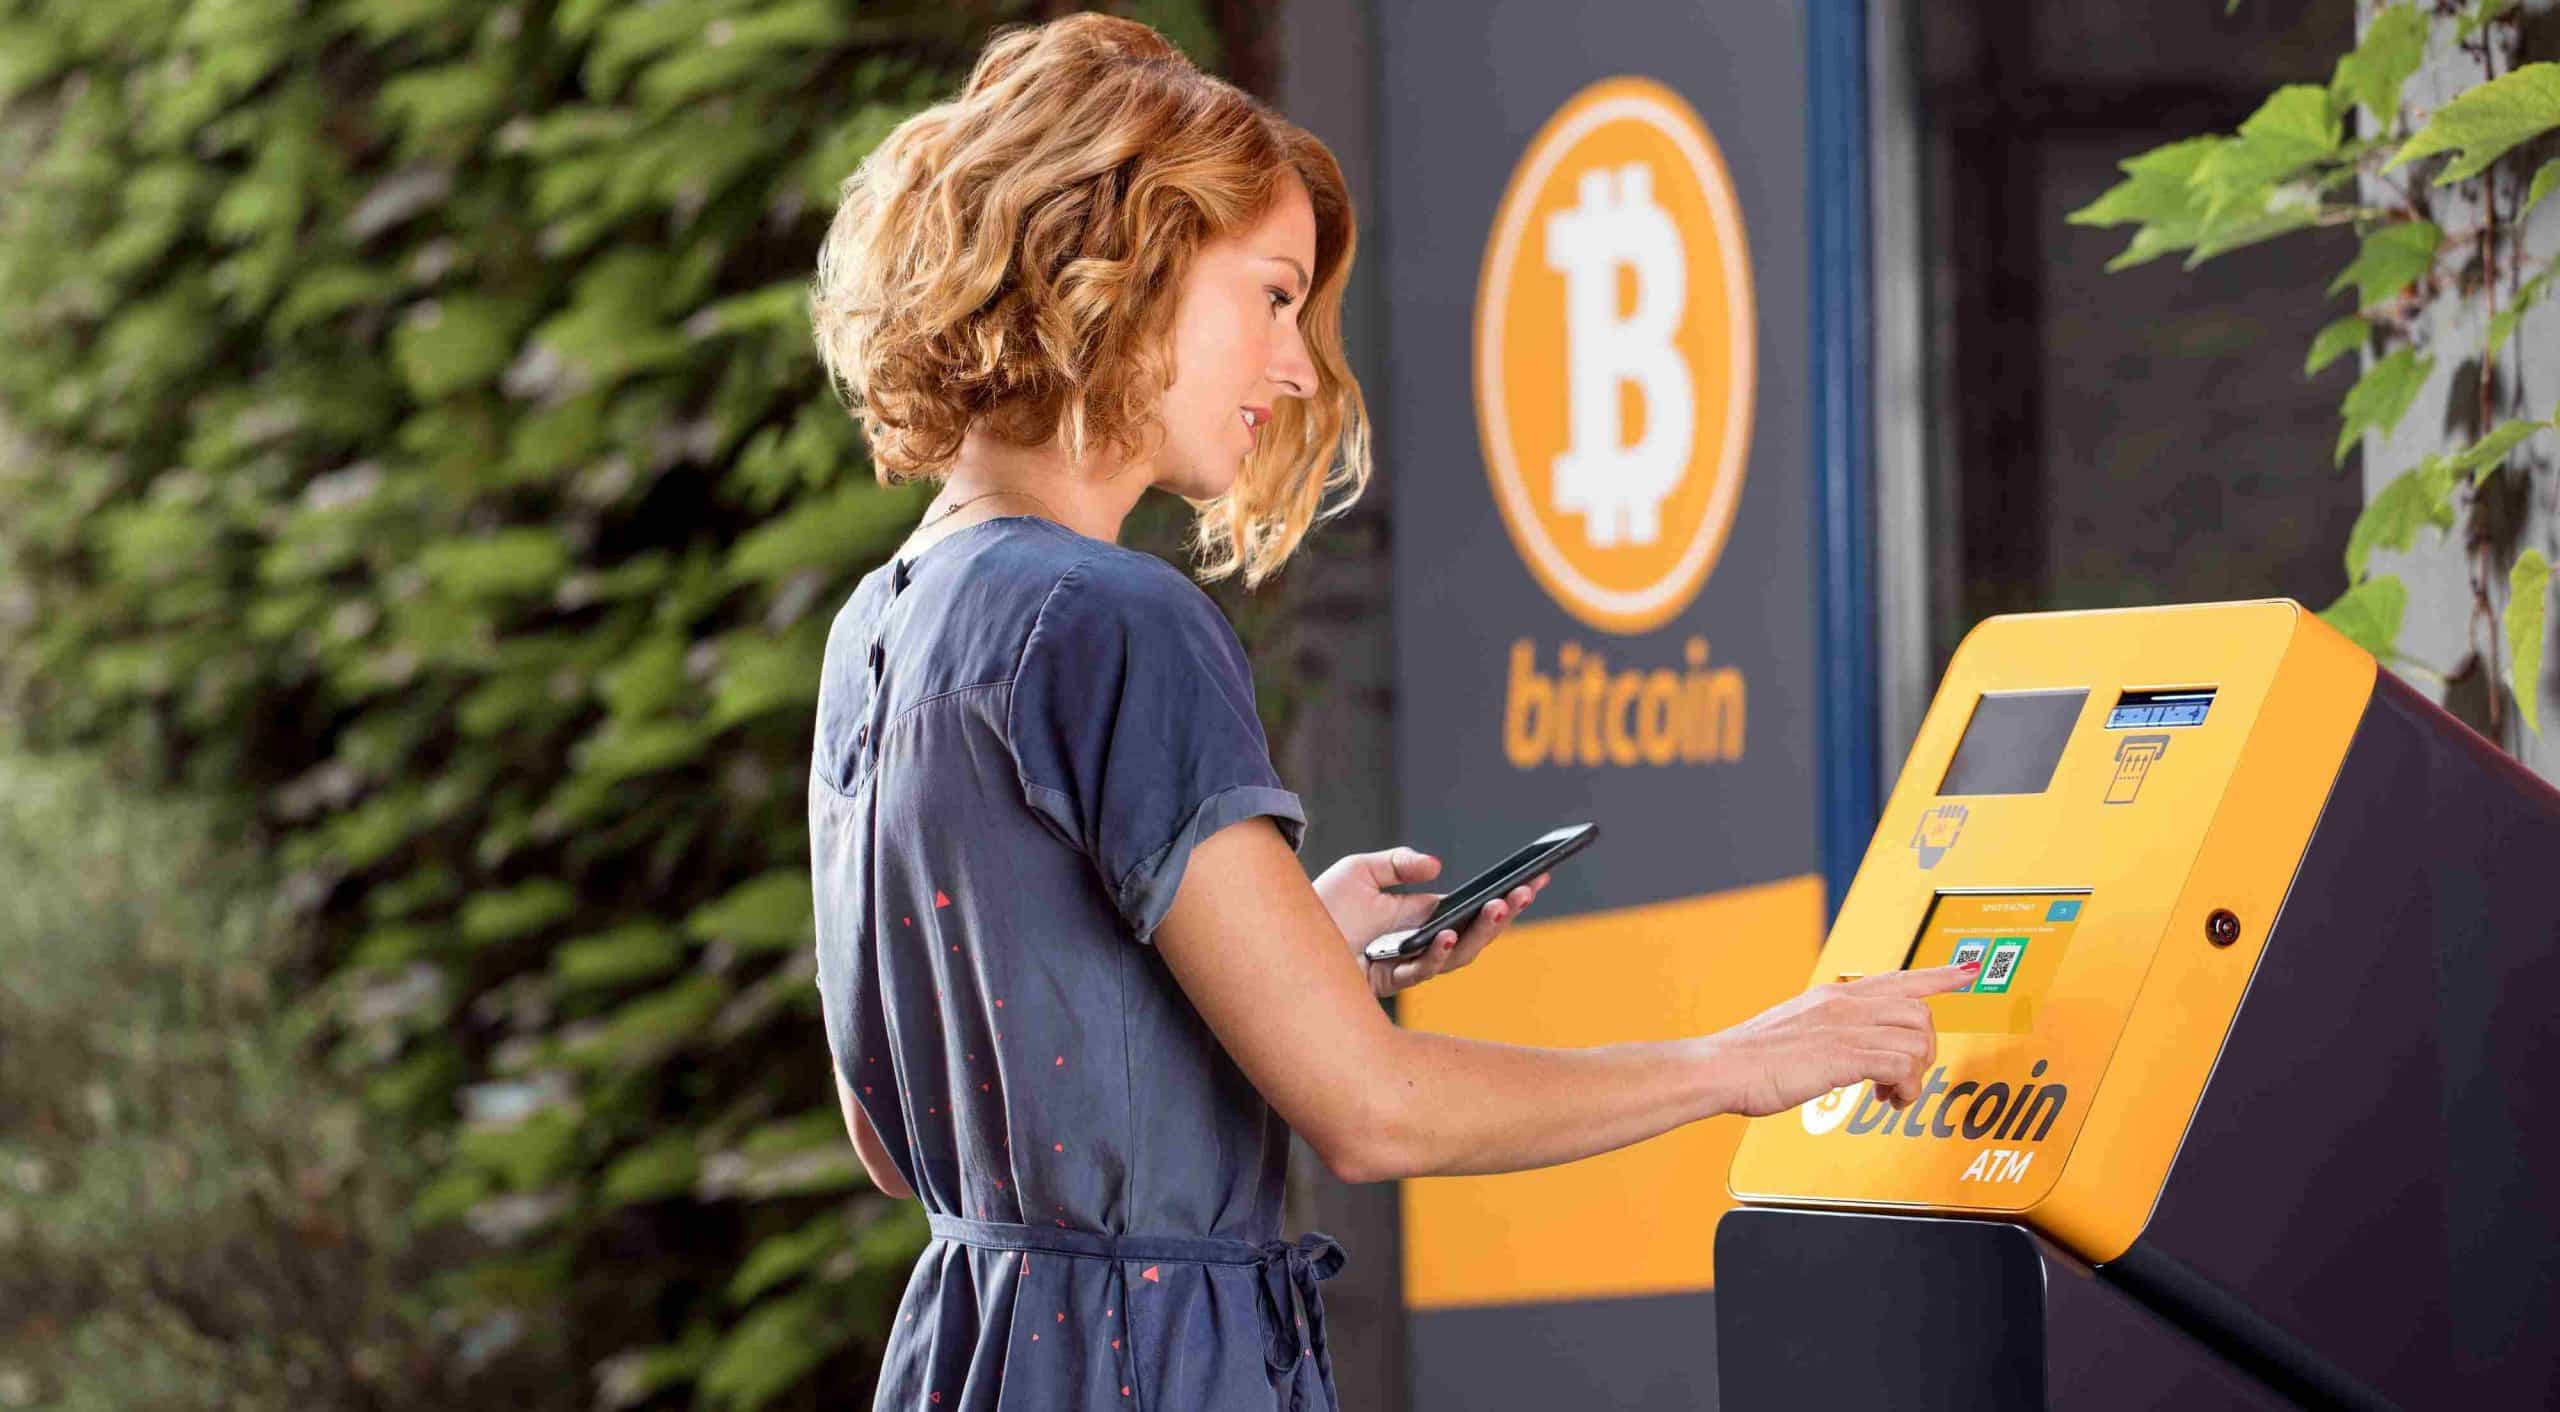 Bitcoin ATM photo by GENERAL BYTES on Unsplash